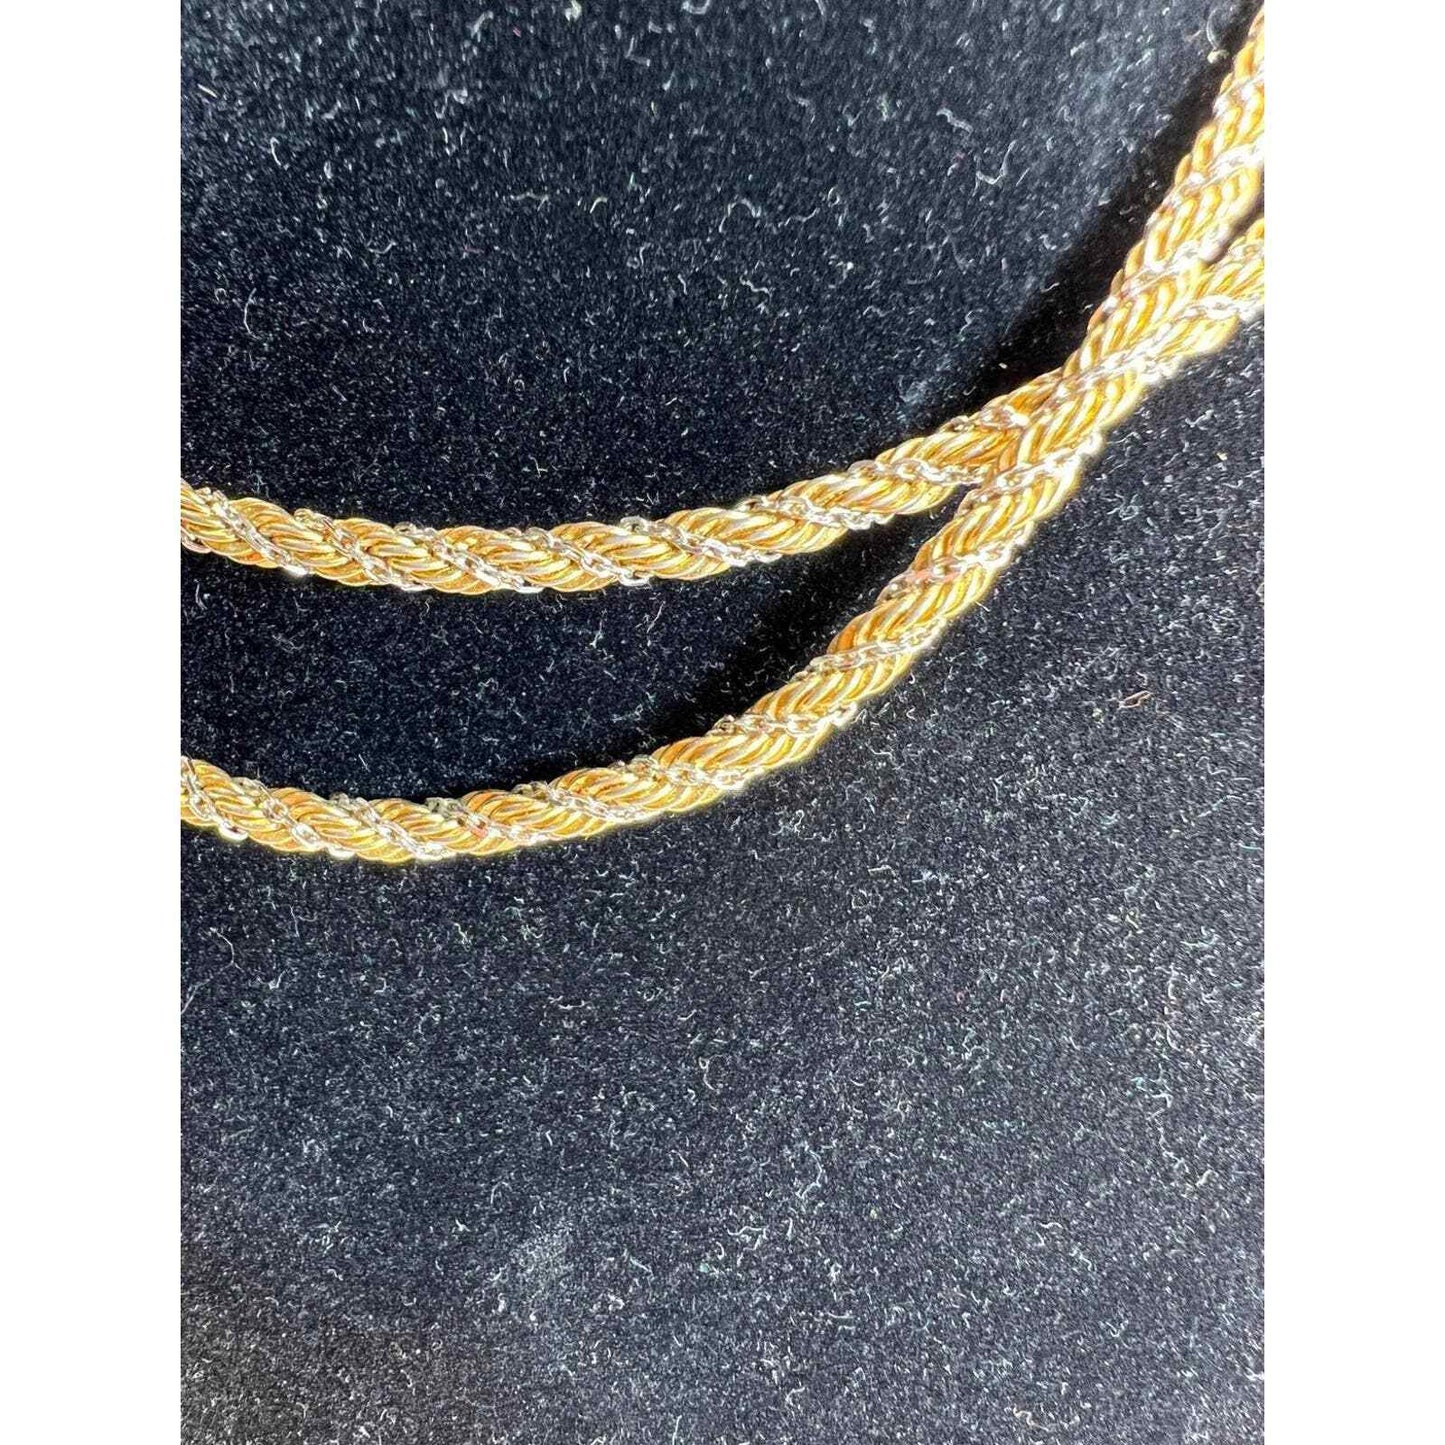 Monet Necklace Rope Chain 2 Tone Gold And Silver Tone 27" Long Hang Tag Vintage